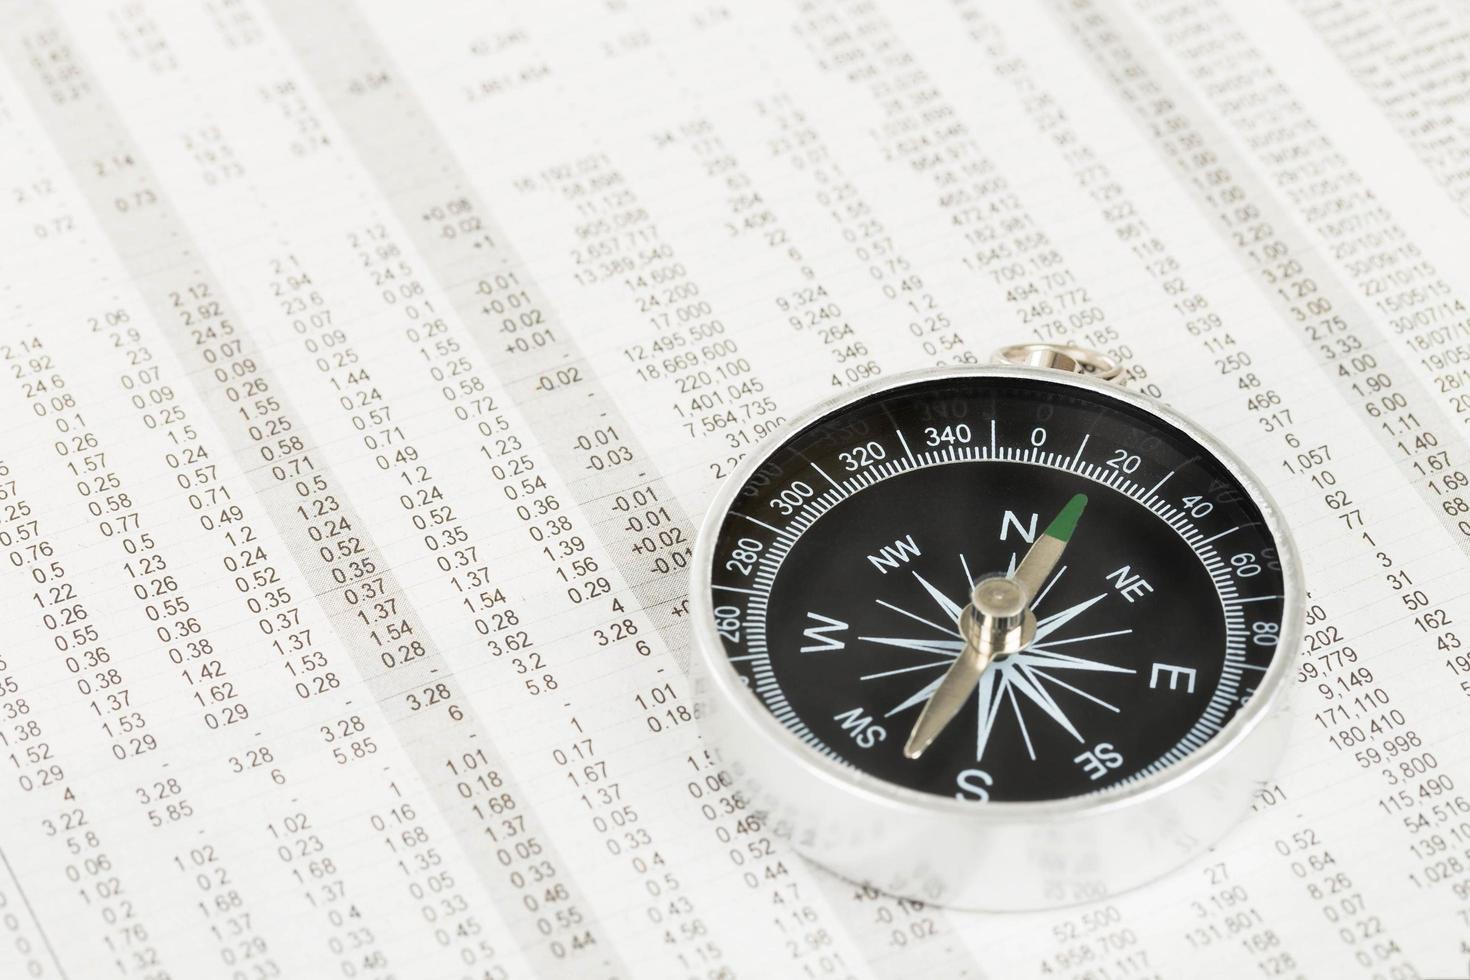 Compass on stock price report investment concept photo